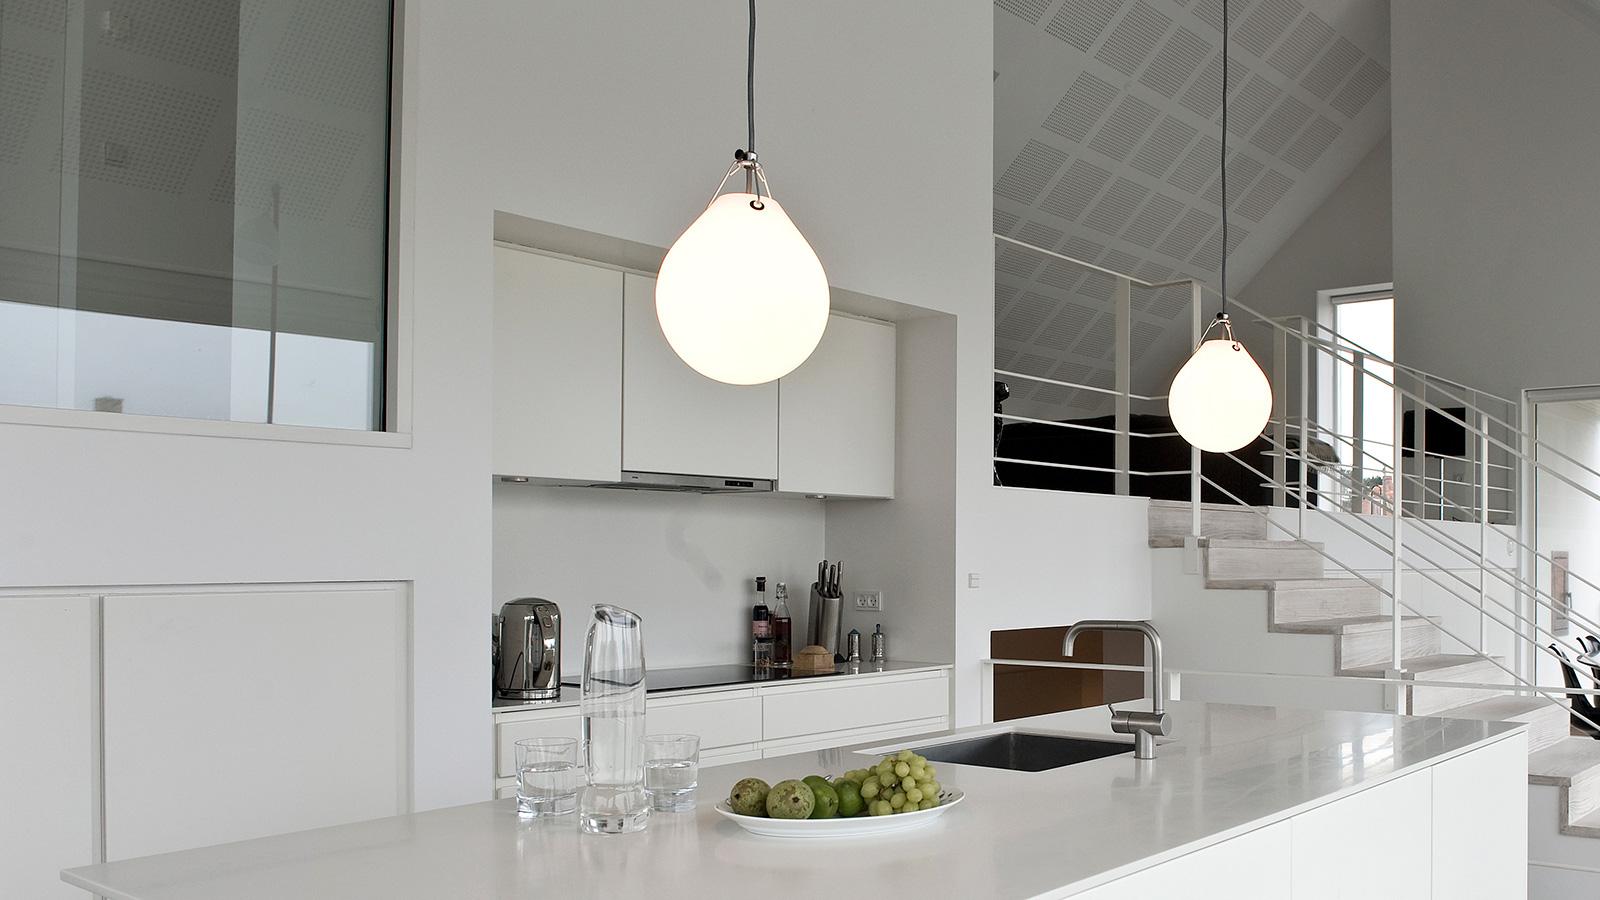 Large Moser pendant by Anu Moser for Louis Poulsen. Hand blown three-layer white opal glass pendant. The Moser pendant is an extremely honest product, where all the parts - except the light source itself - are clearly visible. The original